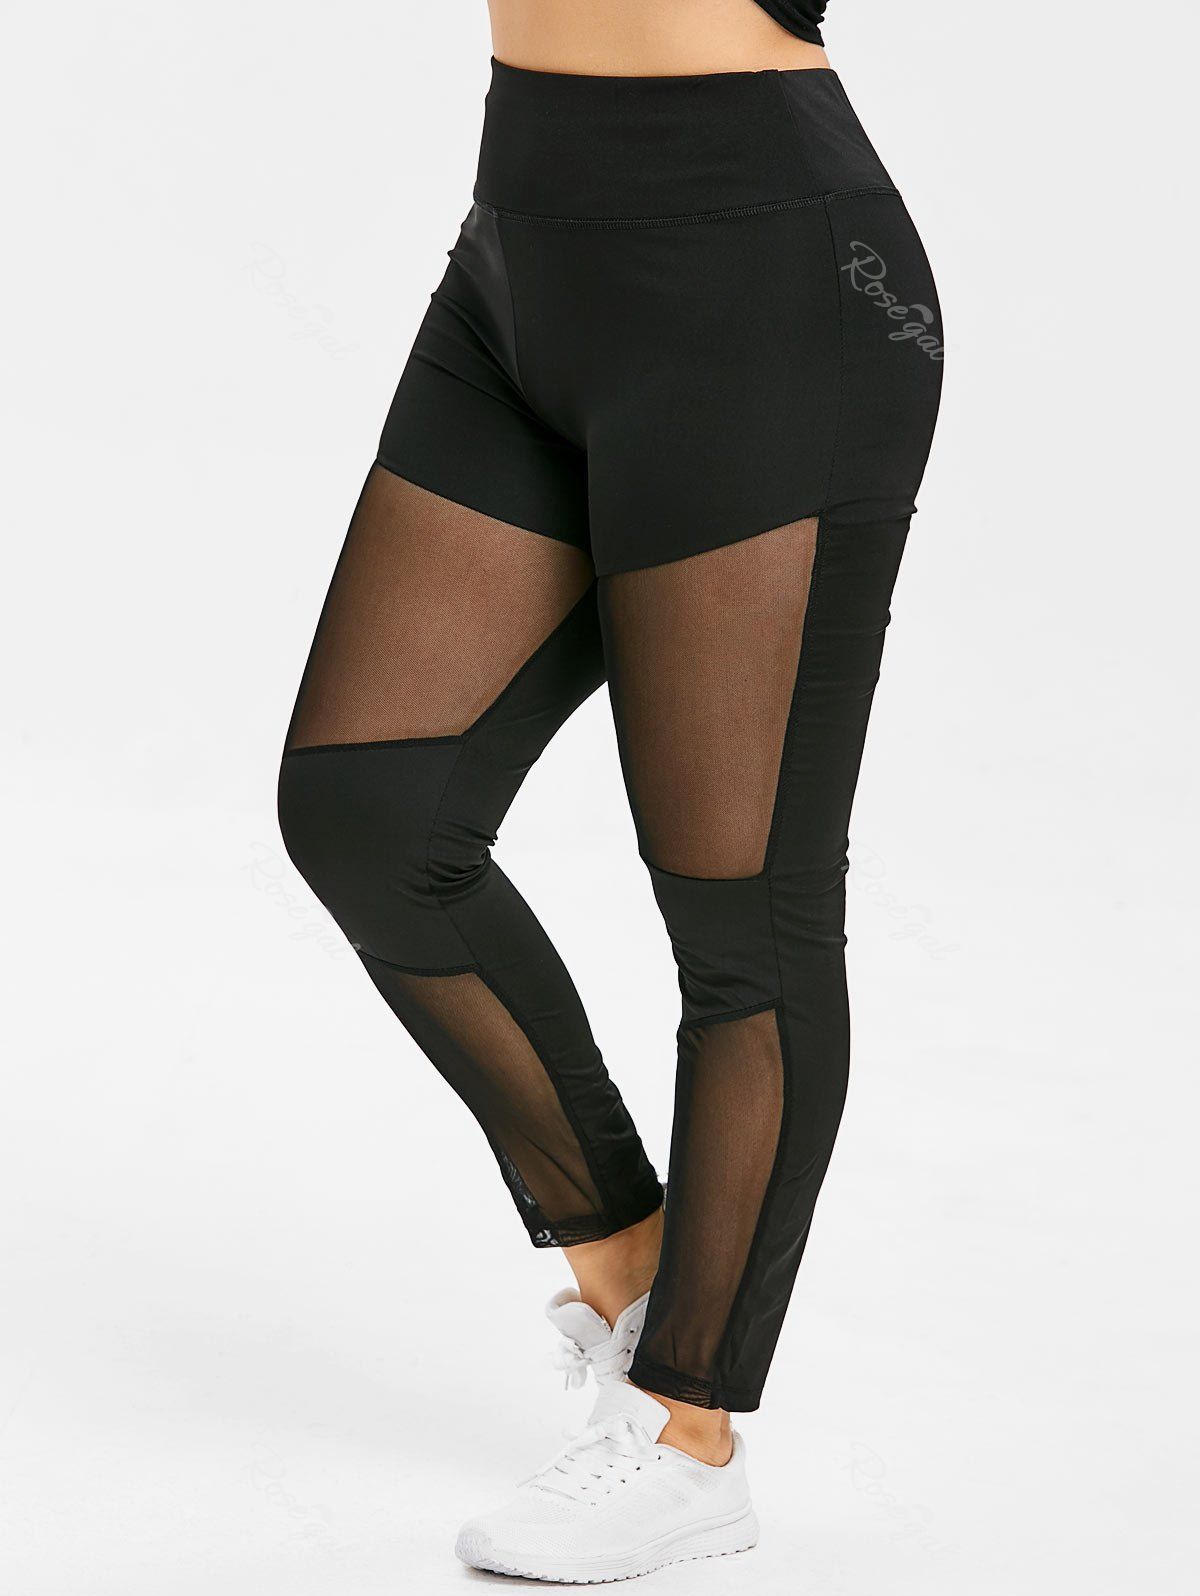 Mesh Workout Leggings India  International Society of Precision Agriculture